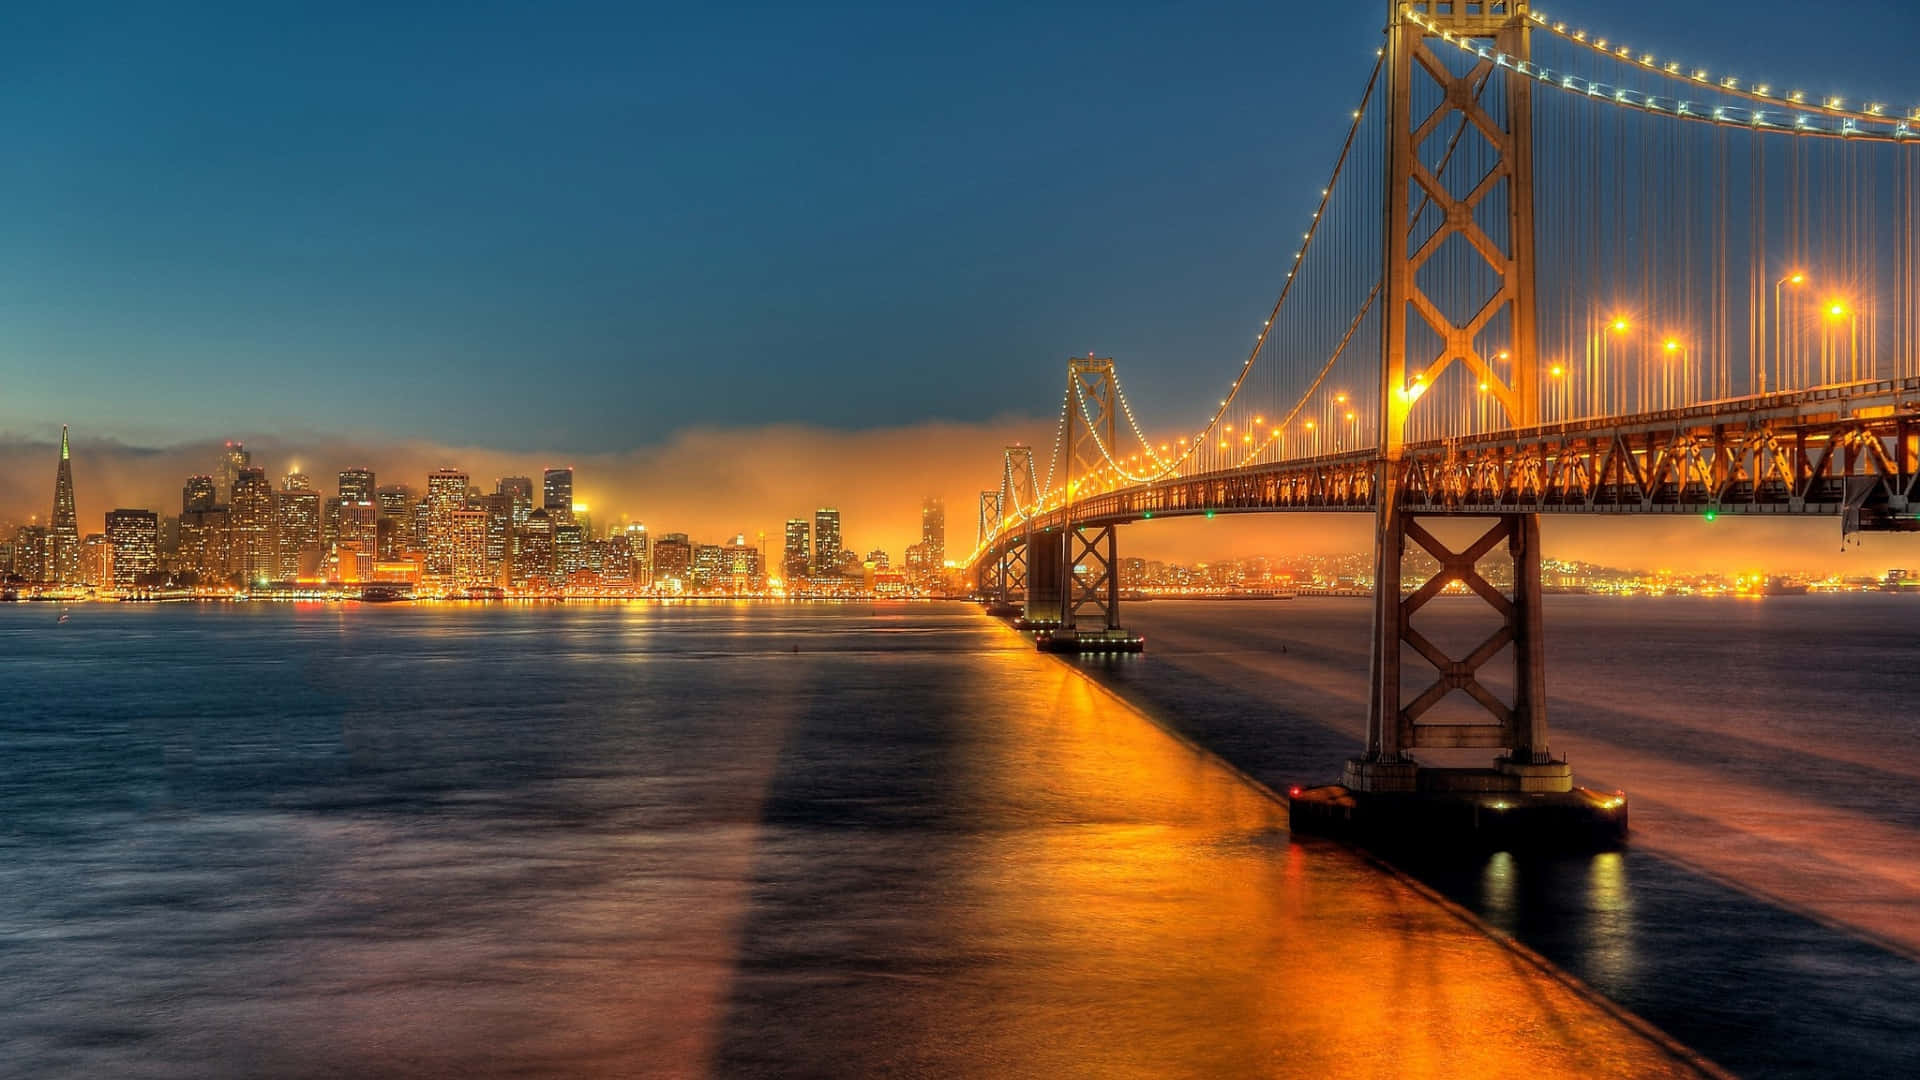 Work remotely in San Francisco on your laptop and take in the beautiful scenery Wallpaper